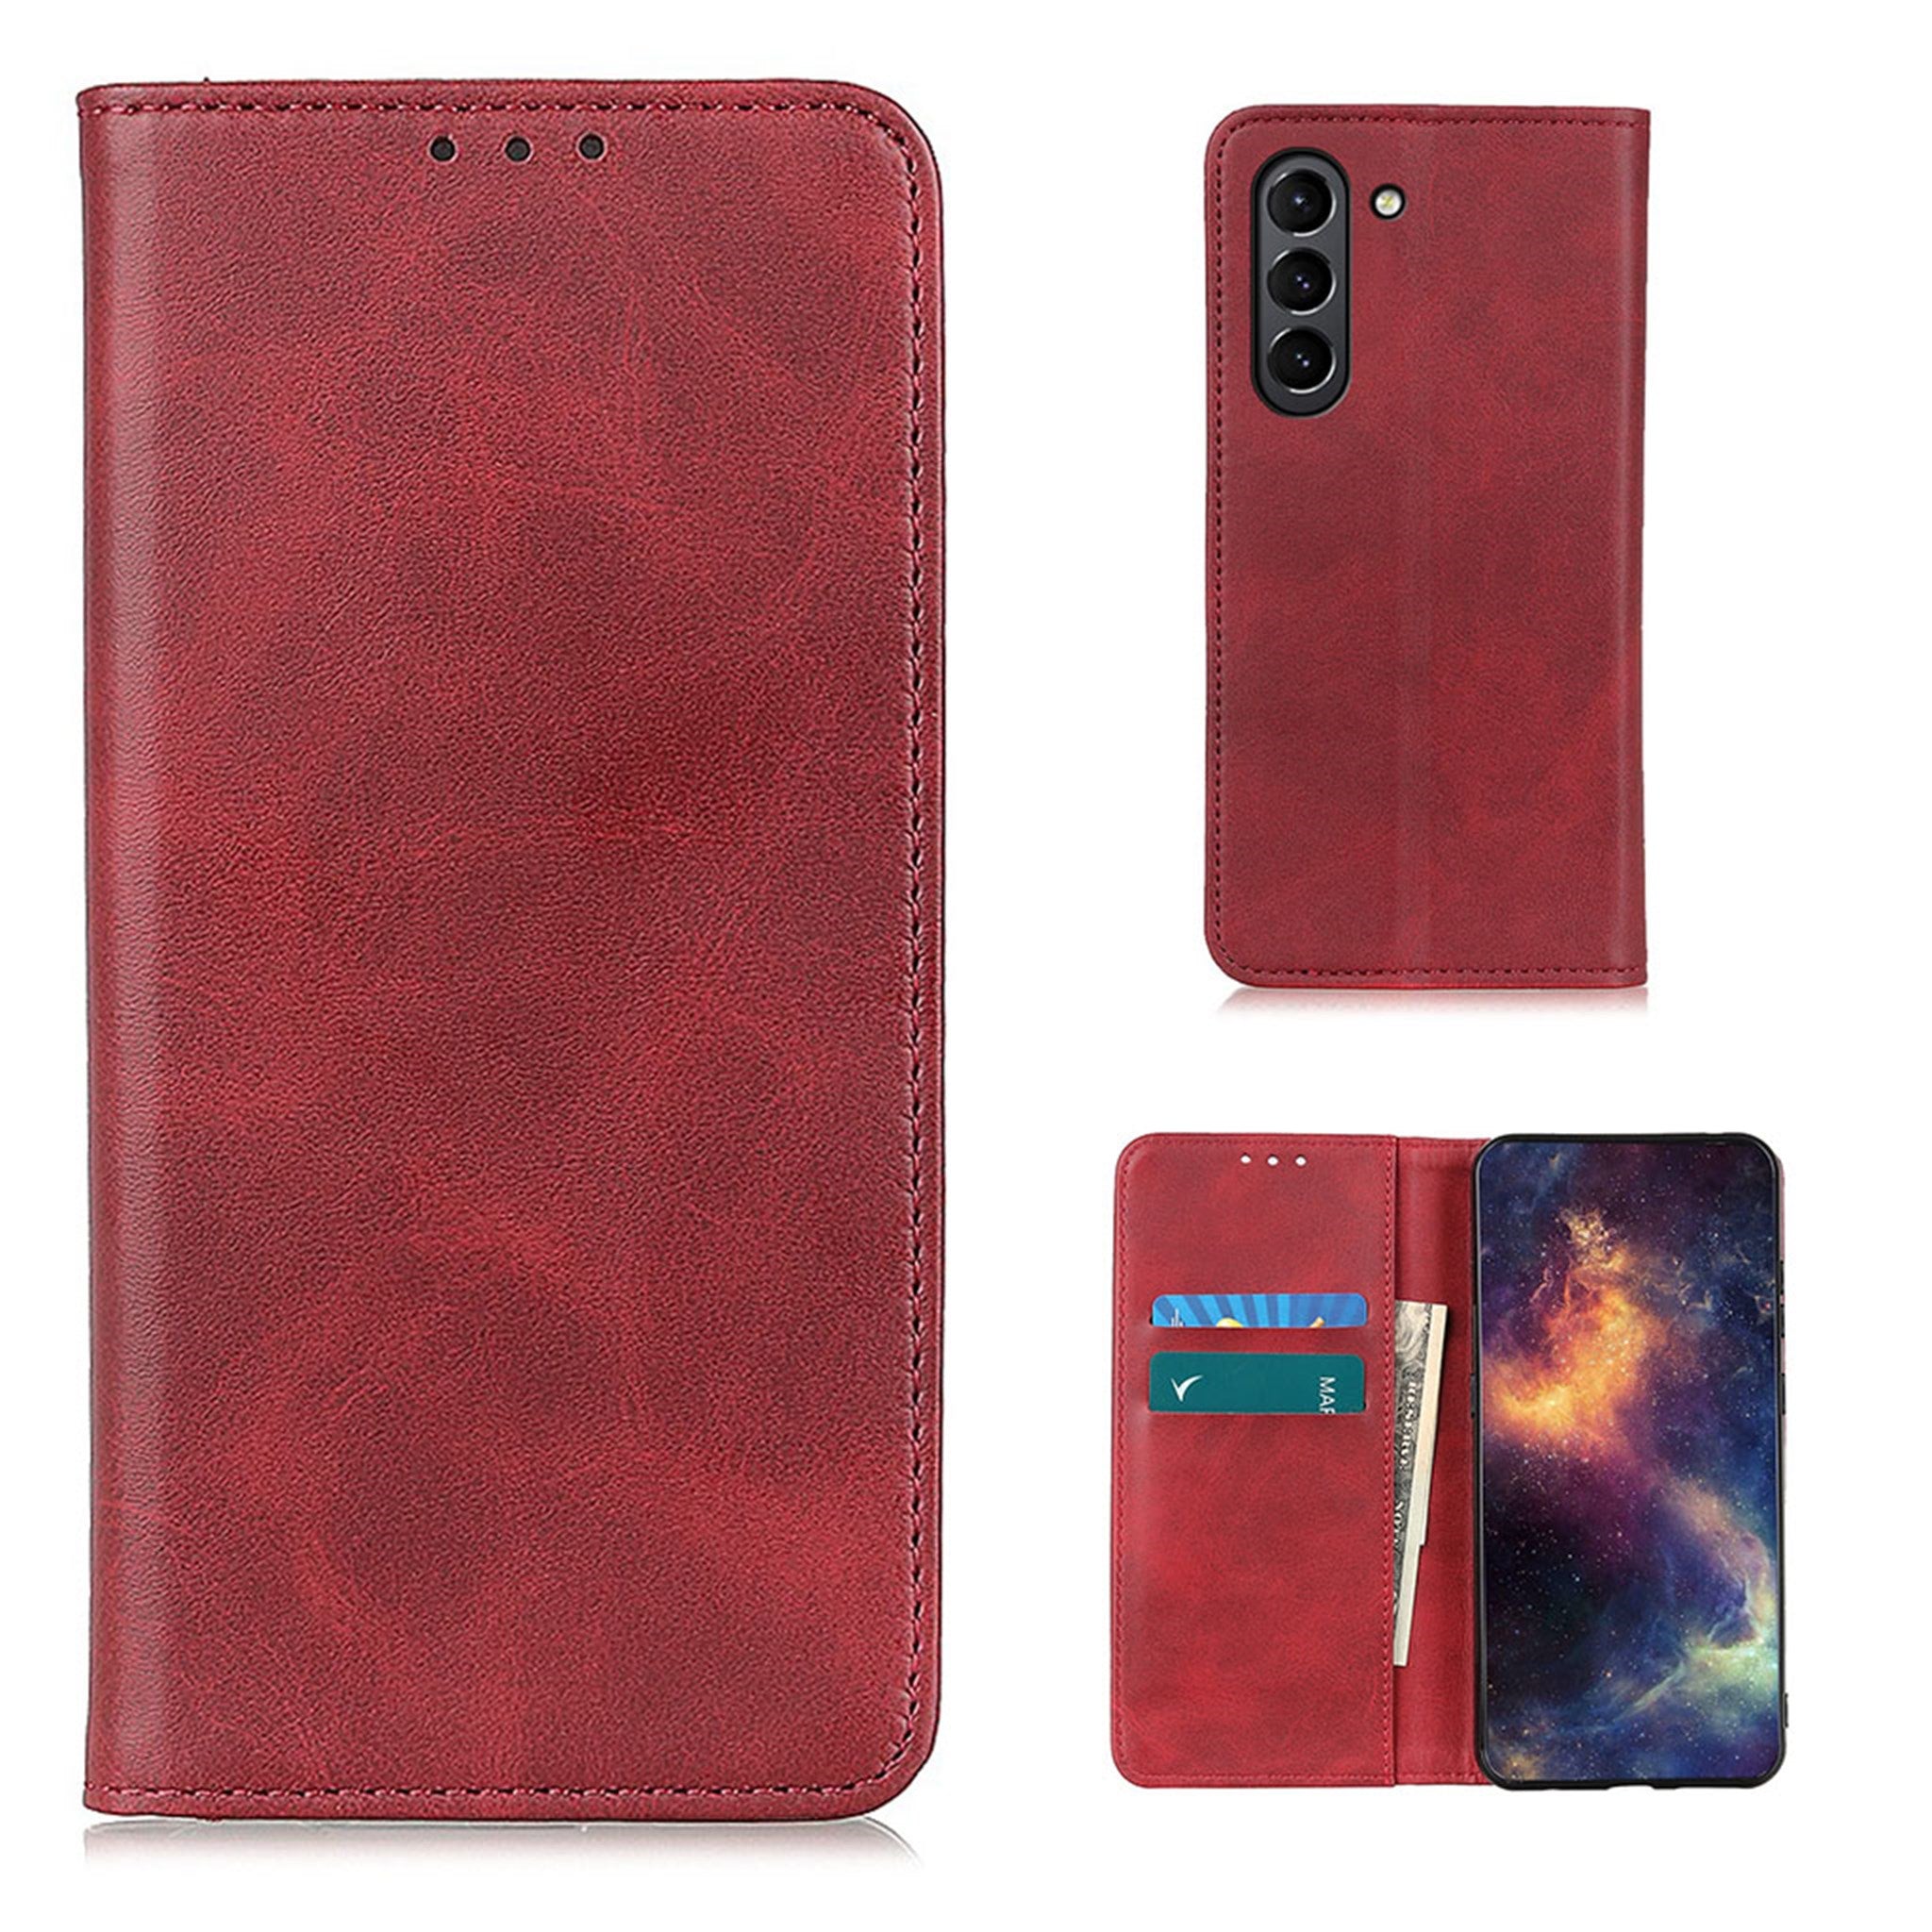 Wallet-style genuine leather flipcase for Samsung Galaxy S21 FE - Red